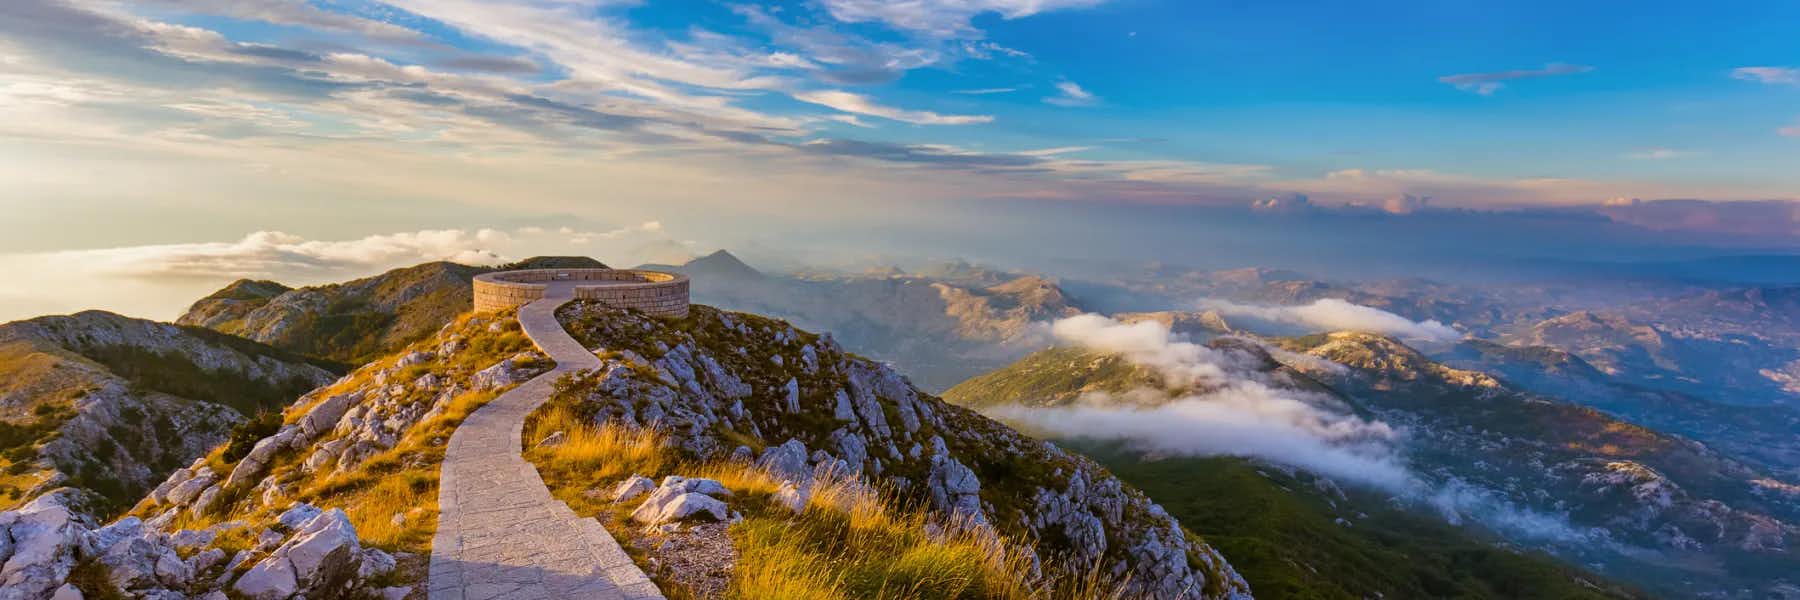 A Guide to the Highlands of Montenegro